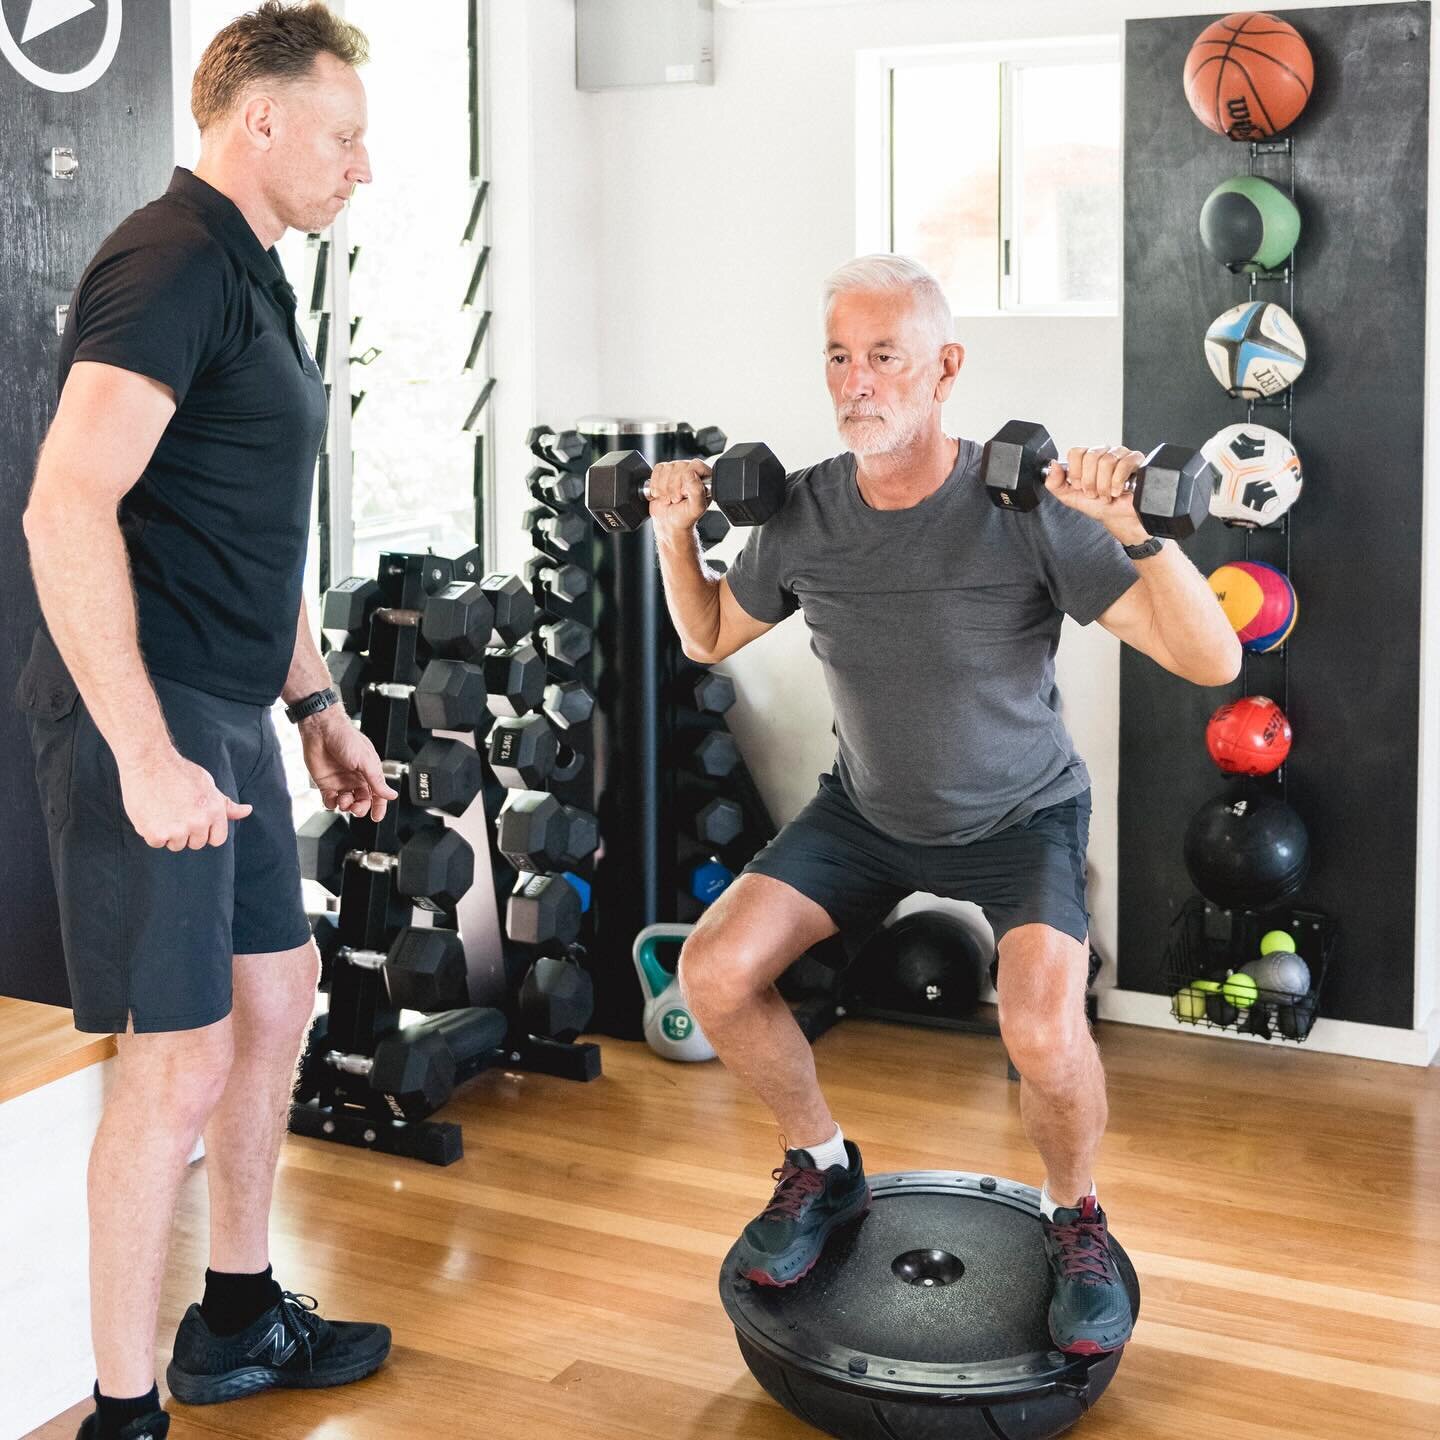 MART Exercise Program

Did you know that muscle mass decreases approximately 3-8% per decade after the age of 30
and this rate of decline is even higher after age 60? Yes, that&rsquo;s right - 30 years of age!! 

For some people, this statistic is no